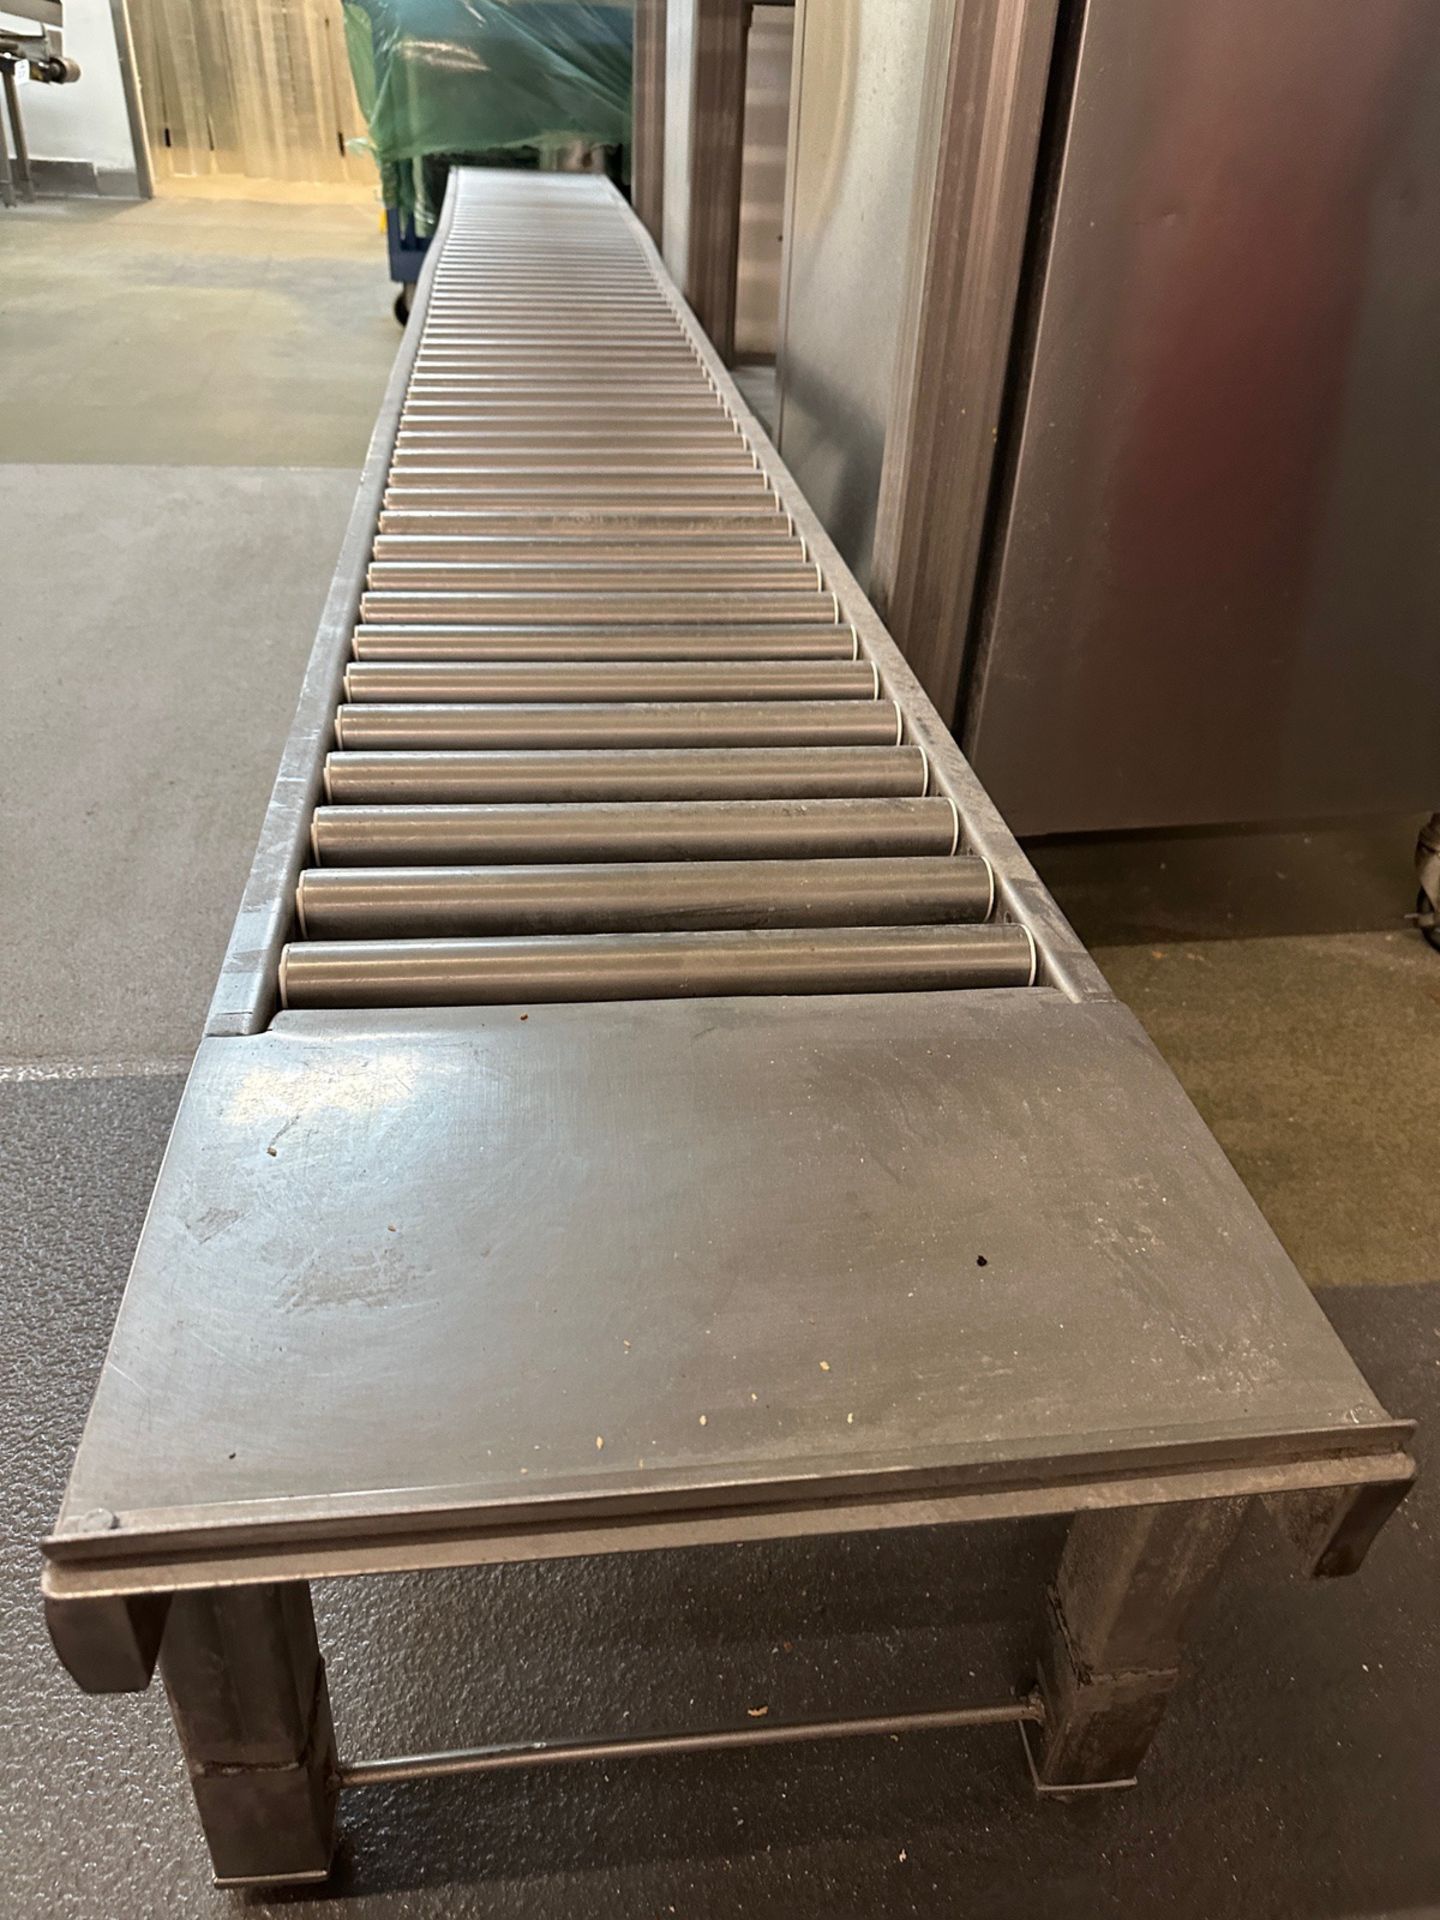 Stainless Steel Roller Conveyor (Approx. 16" x 15') | Rig Fee $650 - Image 2 of 2